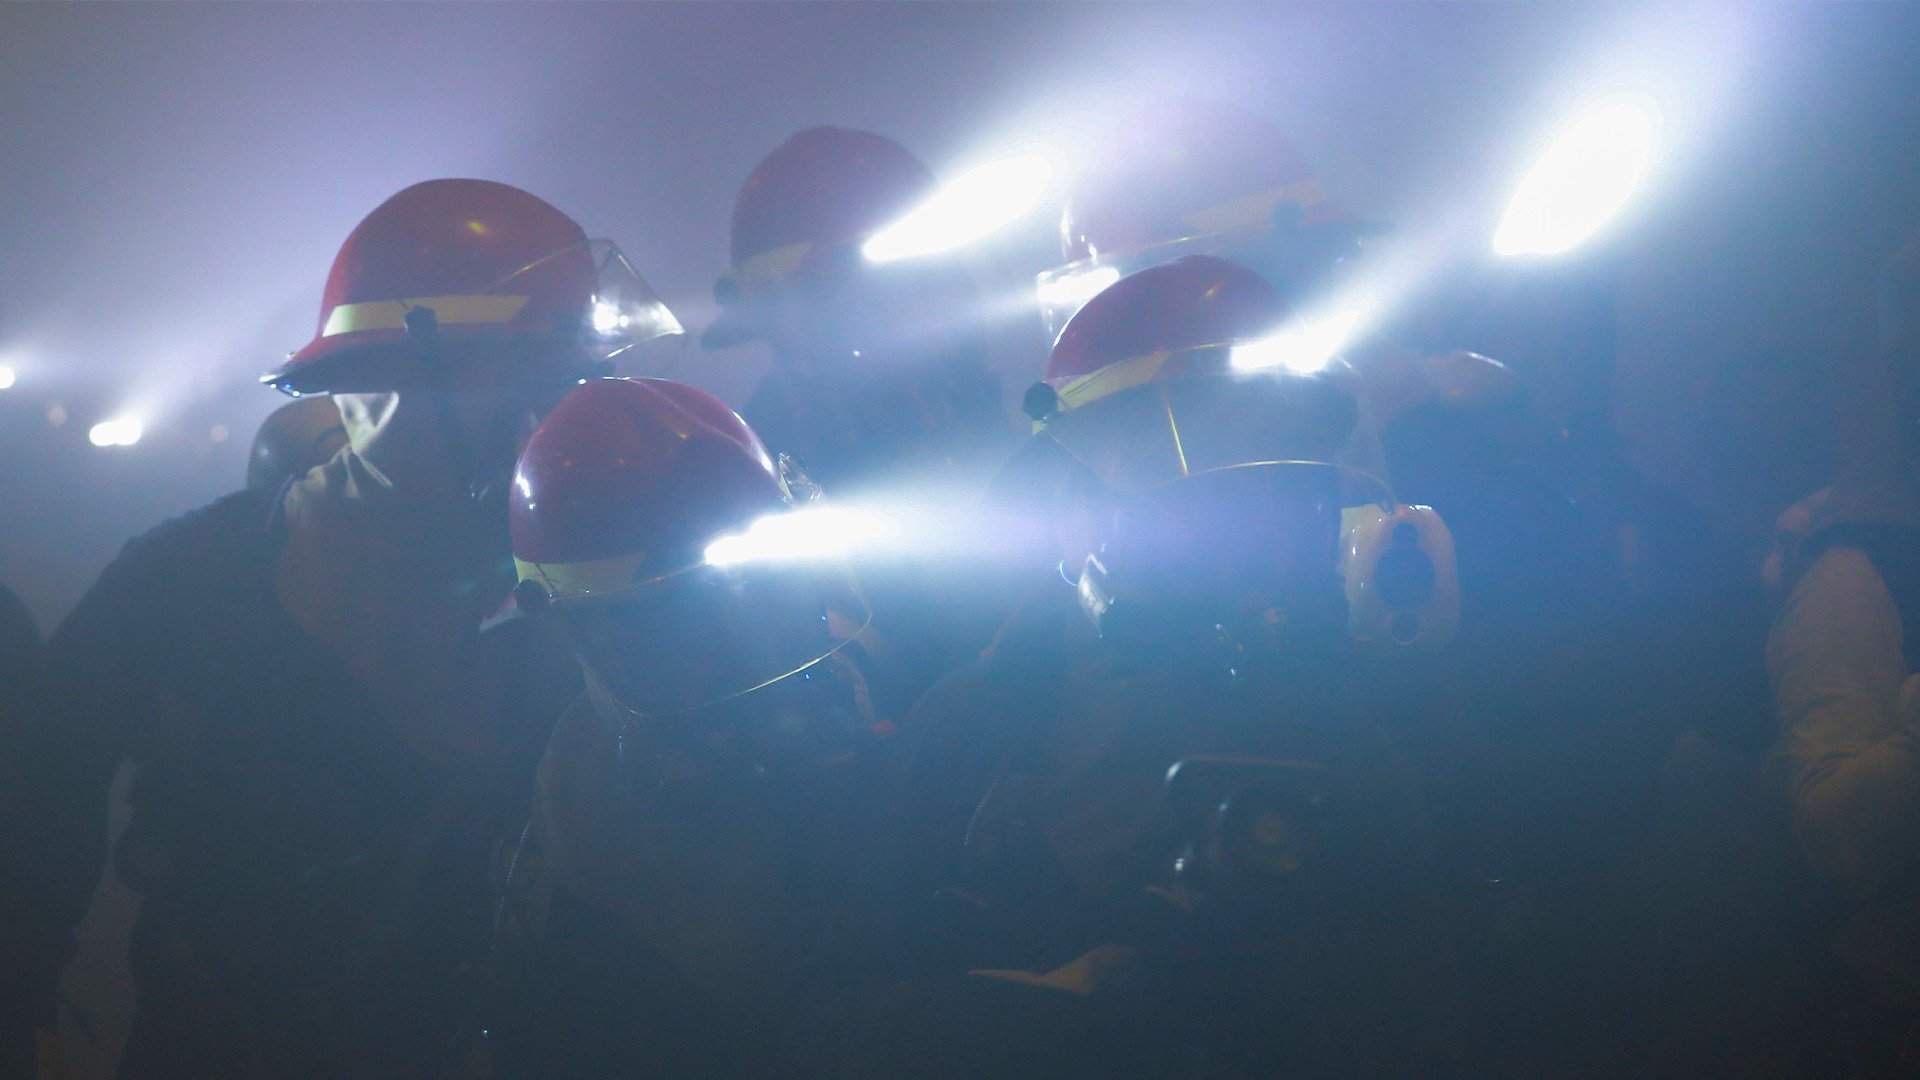 Sailors assigned to Nimitz-class aircraft carrier Abraham Lincoln (CVN 72) participate in firefighting drills on June 6, 2017, while the warship was underway in the Atlantic Ocean. On Nov. 29, 2022, off the coast of Southern California, nine sailors were injured battling a blaze on board the flattop. US Navy photo by Mass Communication Specialist Seaman Jacob Smith.